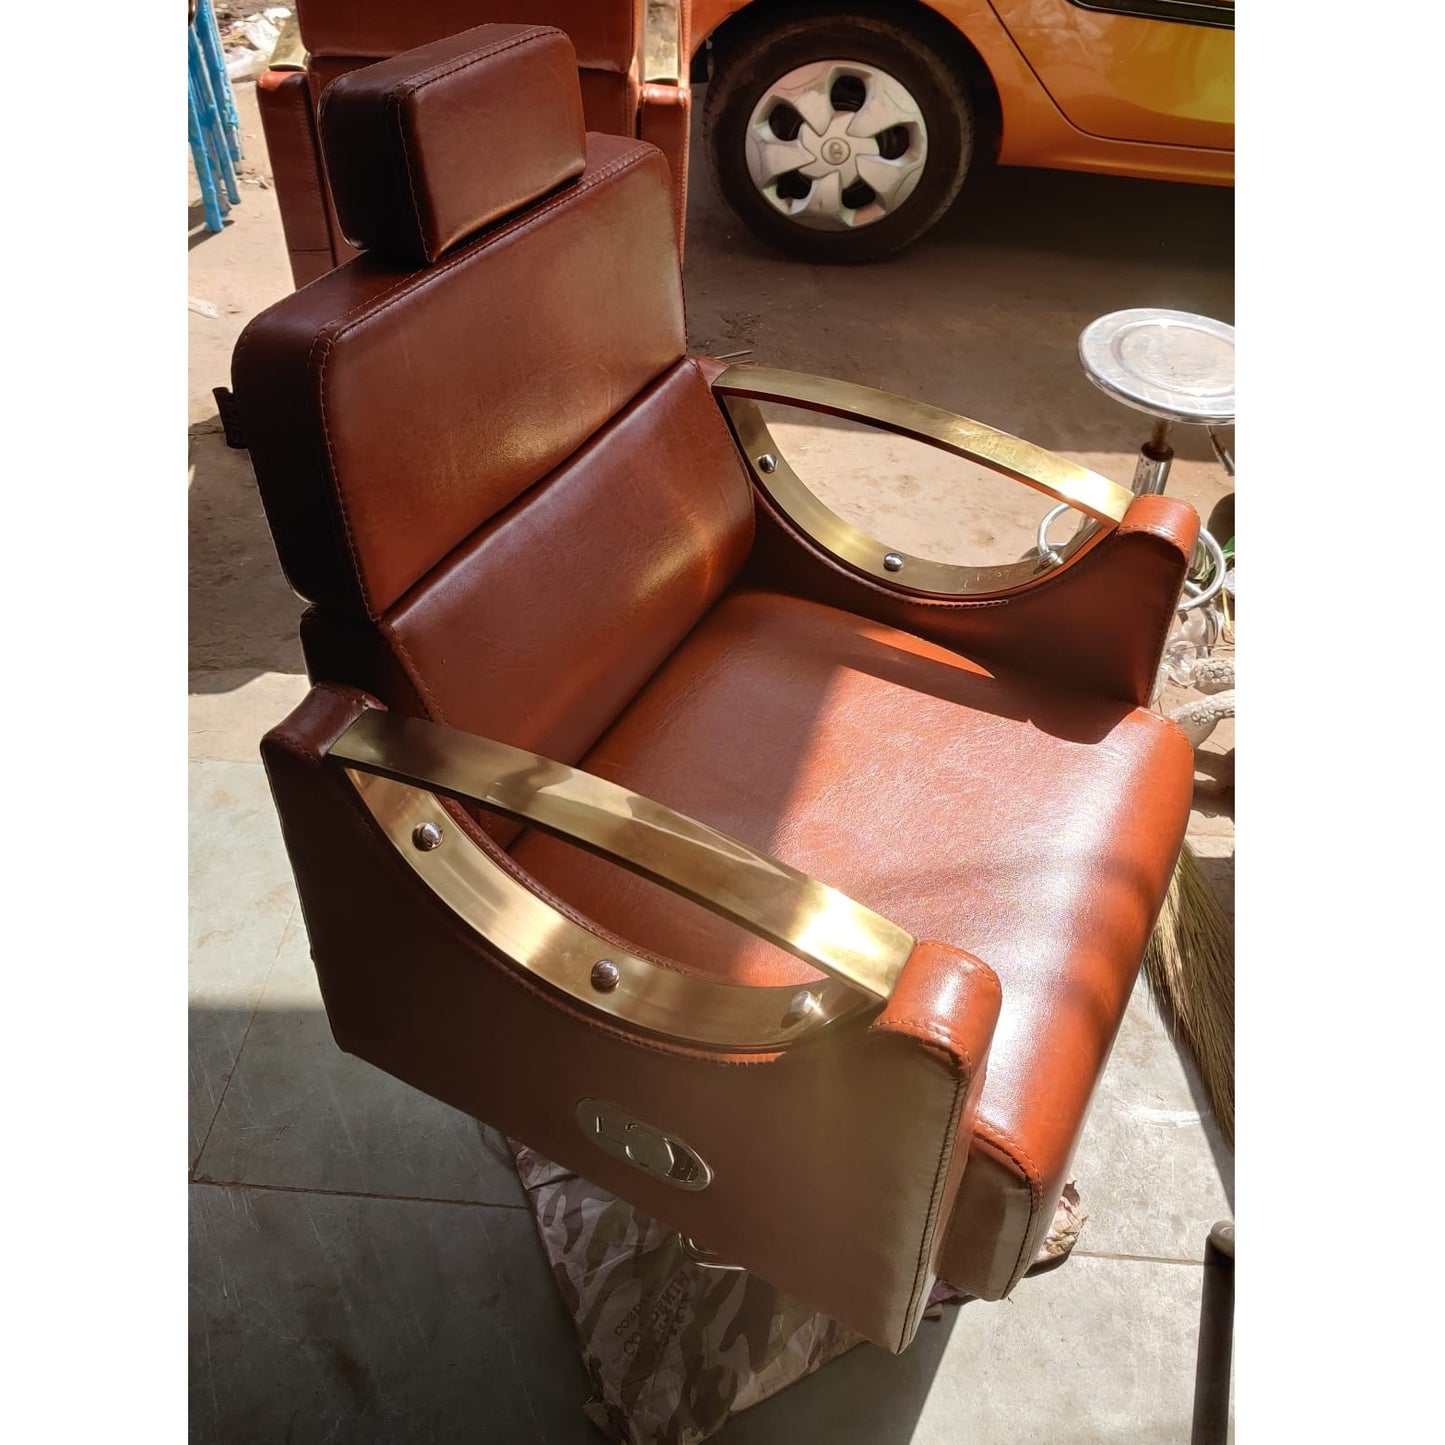 Salon Chair, Barber Chair,Beauty Parlor Chair with Hydraulic Base and Pushback System - Brown